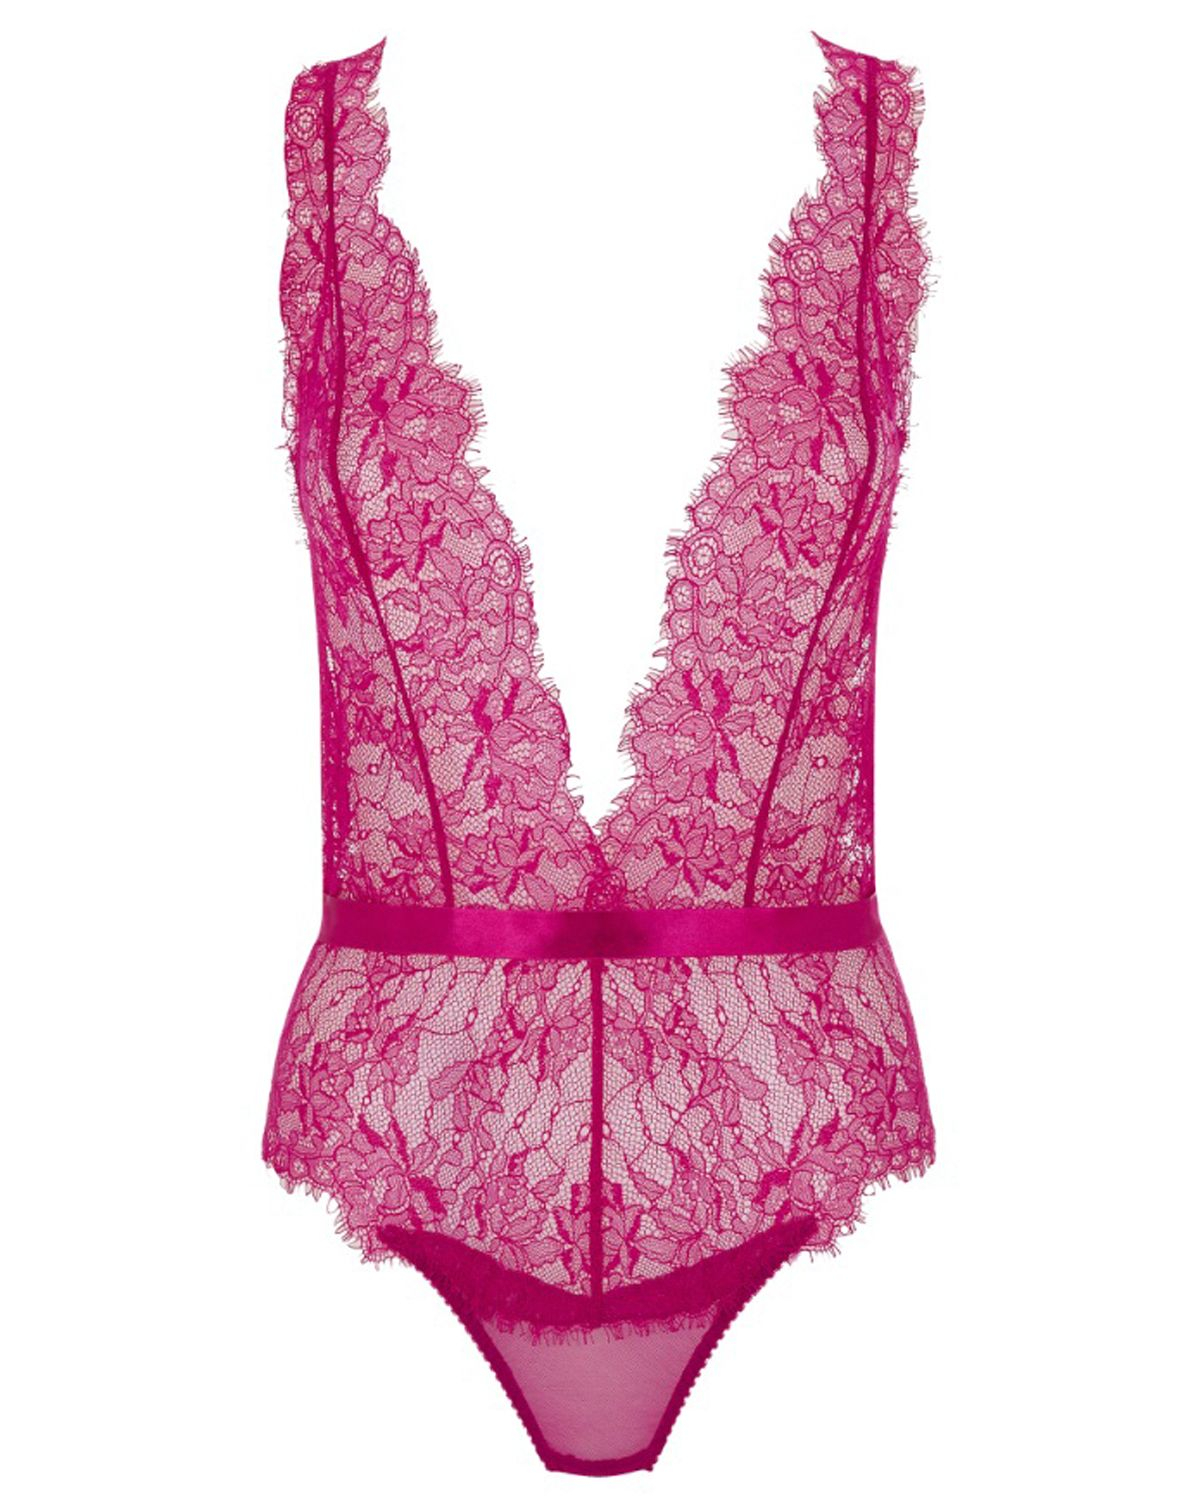 Lyst - L'Agent By Agent Provocateur Idalia Lace Playsuit in Pink